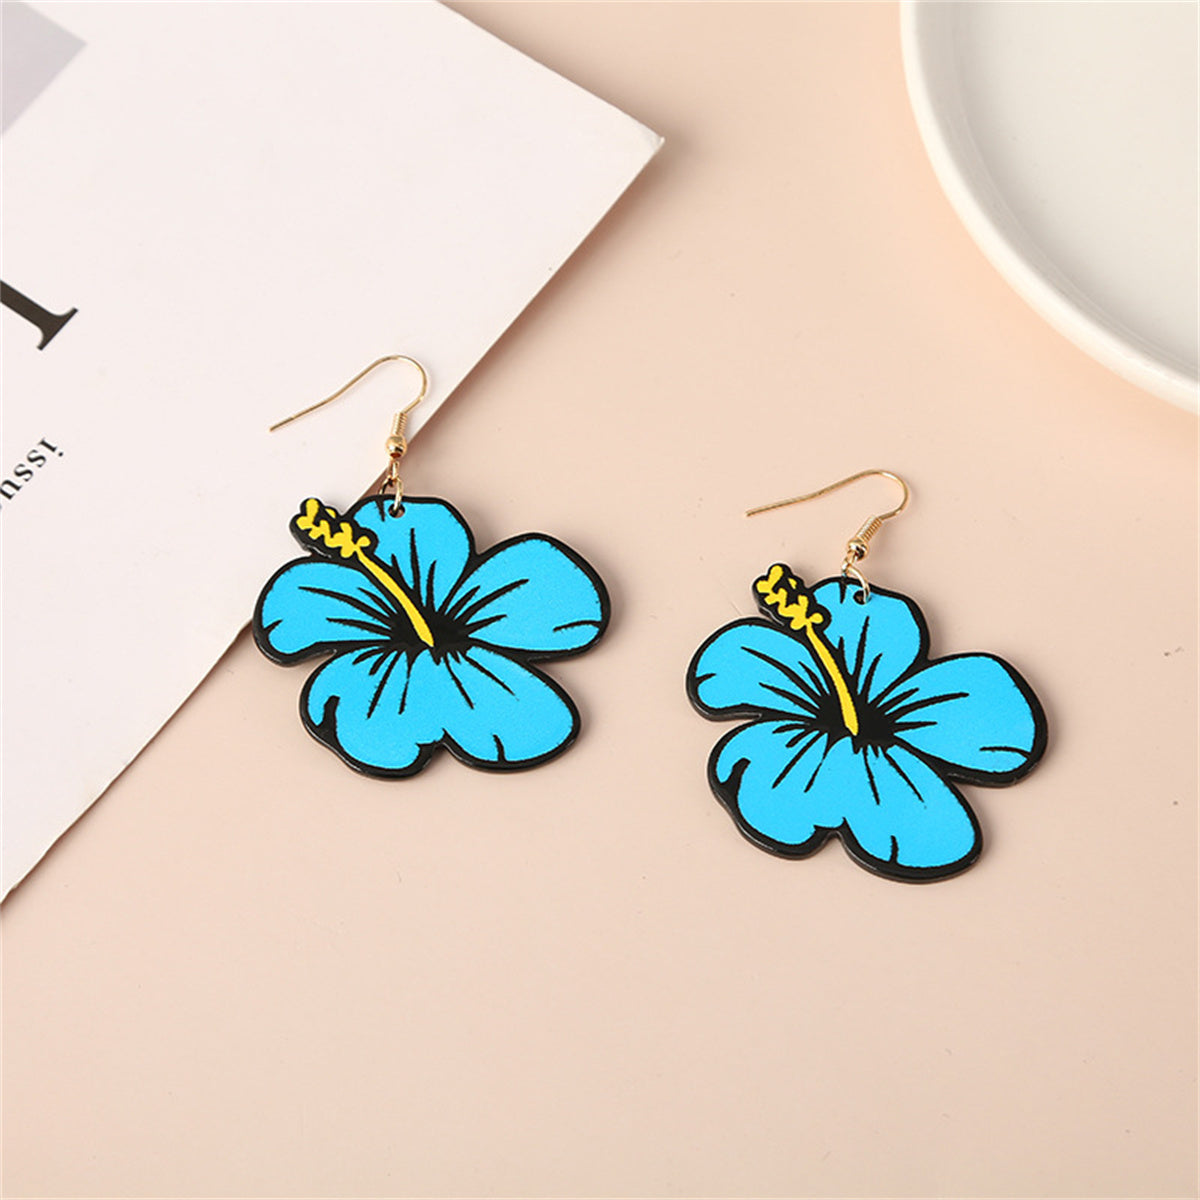 Exaggerated Flower Earrings for Women Girls, Flower Shaped Earrings with Yellow Bud